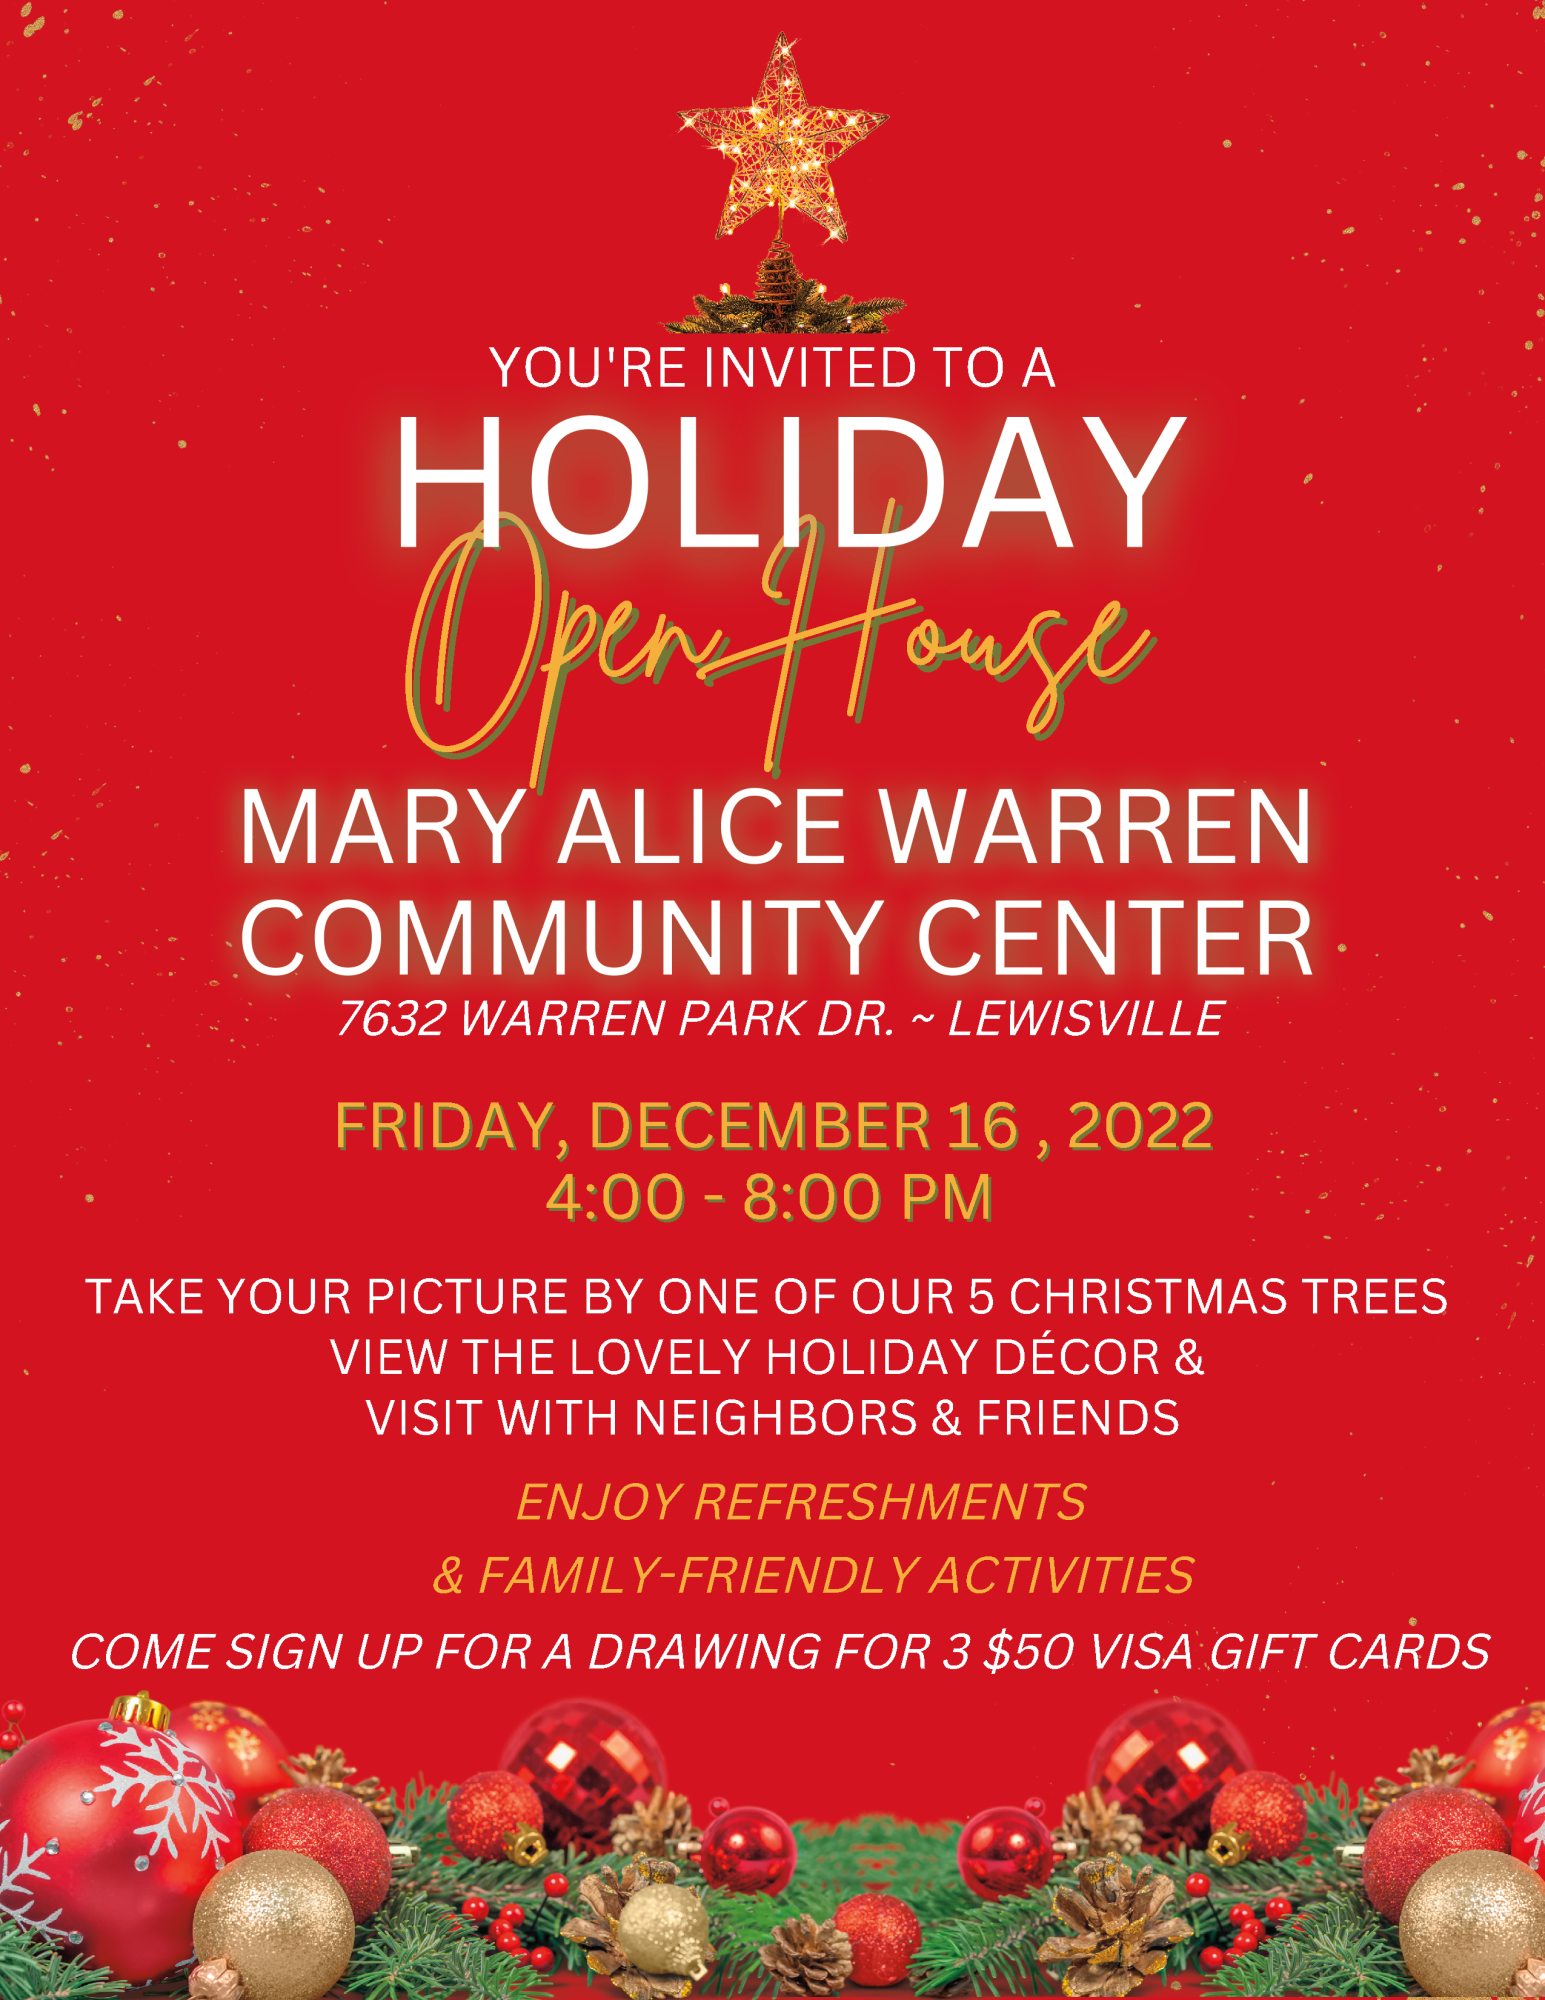 MAWCC Holiday Open House 2022